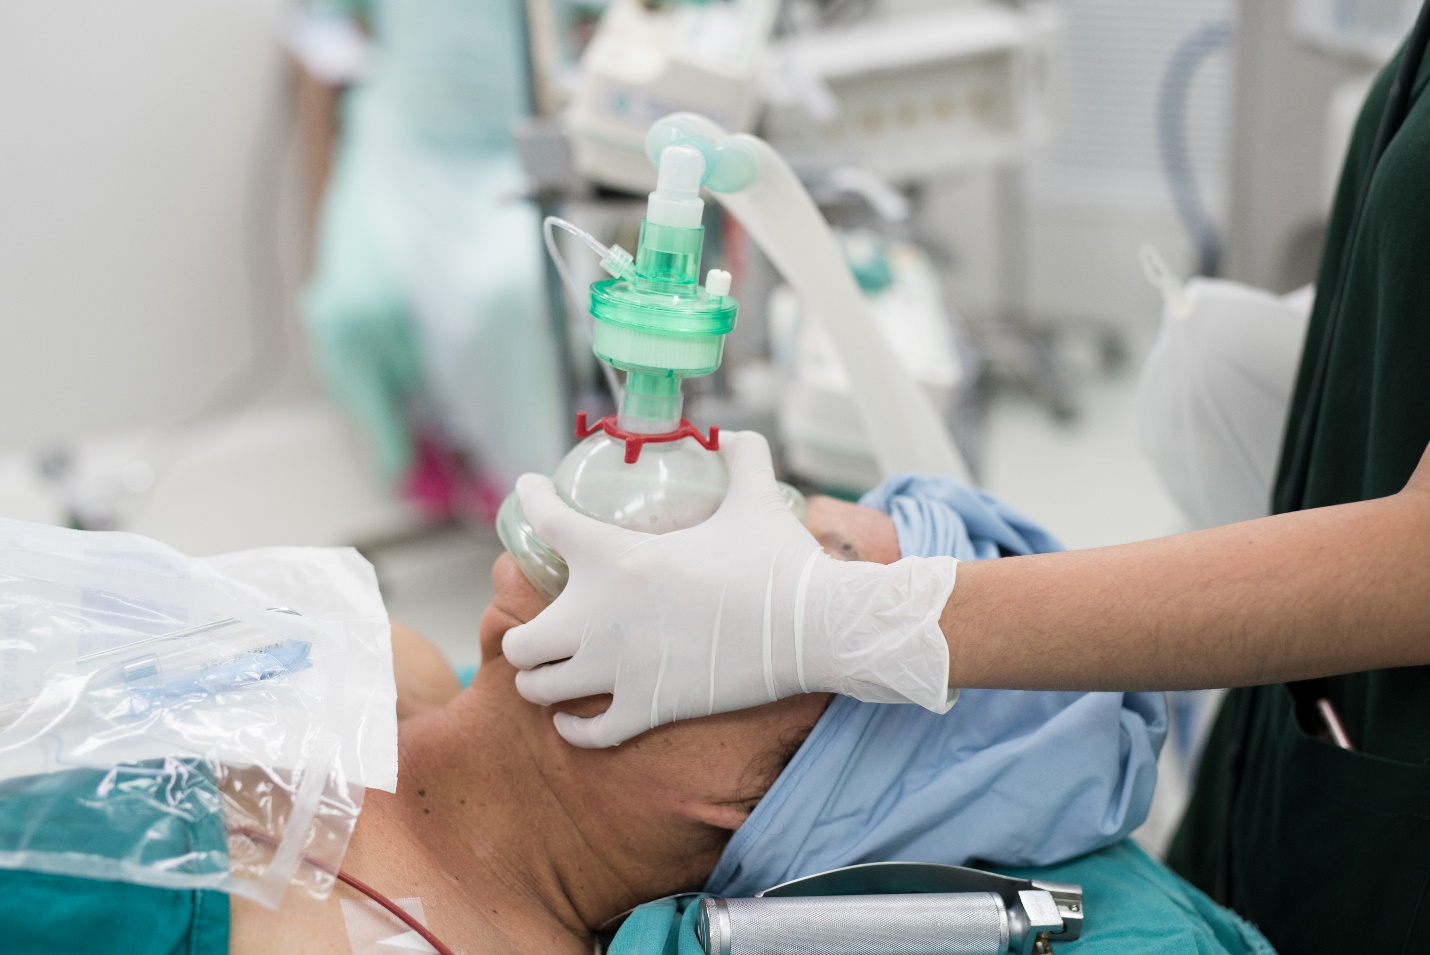 Artificial Ventilation and Anaesthesia Masks Market